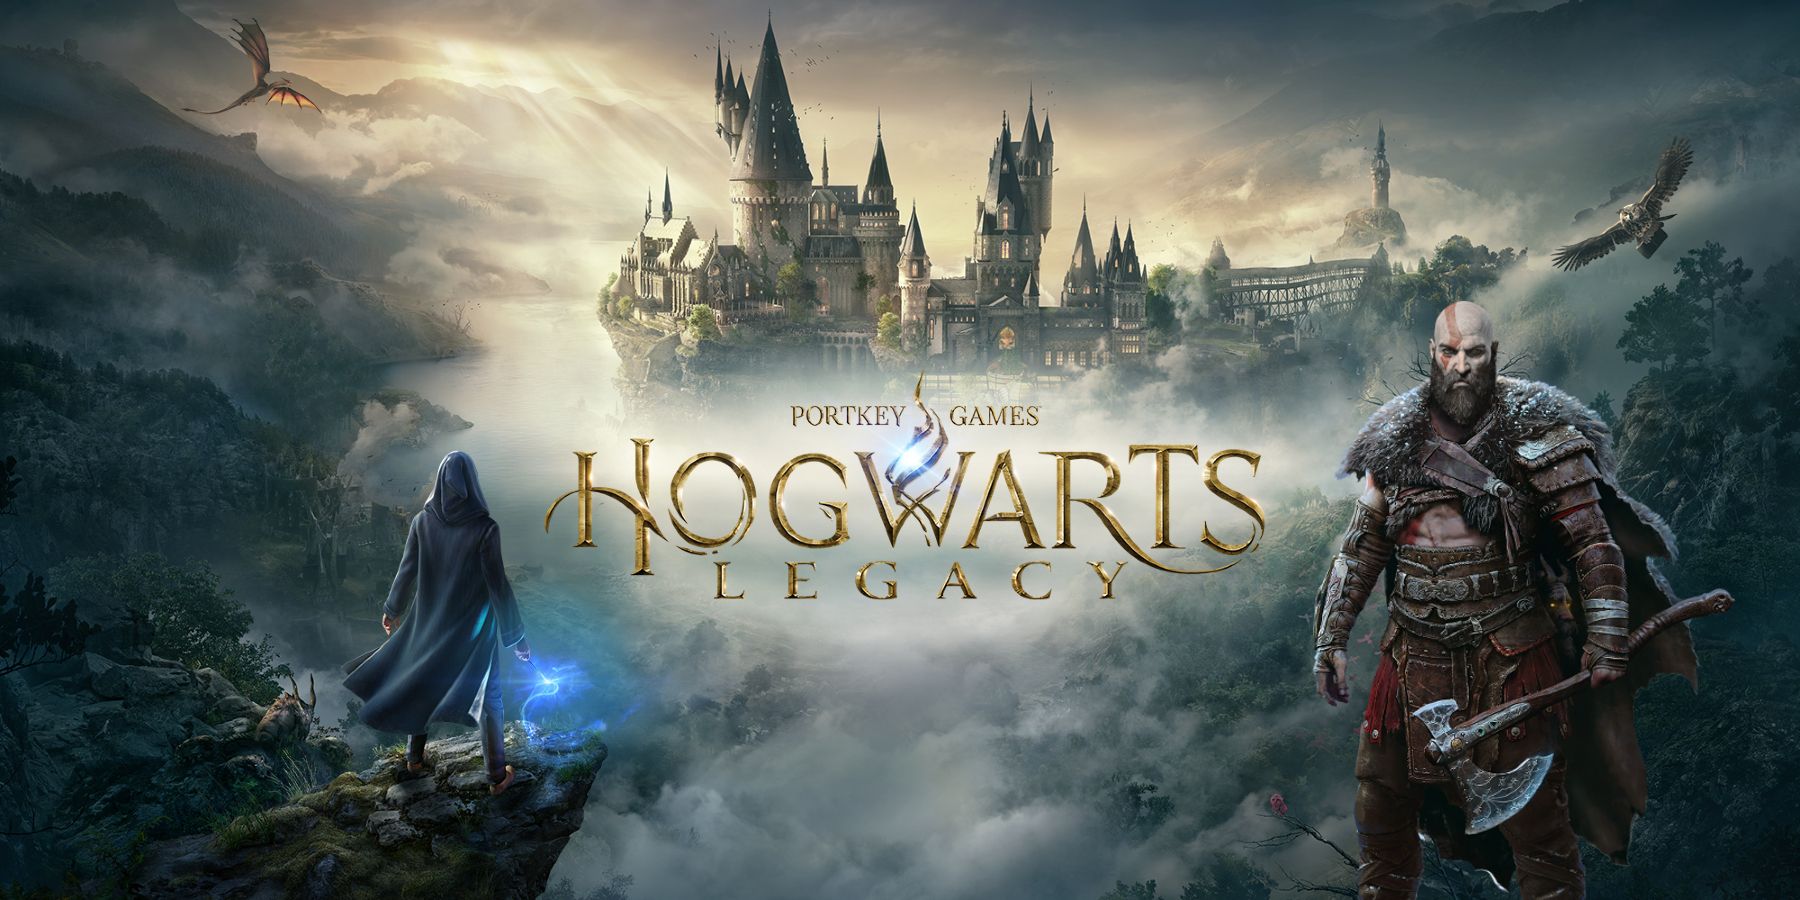 If Hogwarts Legacy 2 Adds One Important Feature, It Should Look to God of War For Inspiration